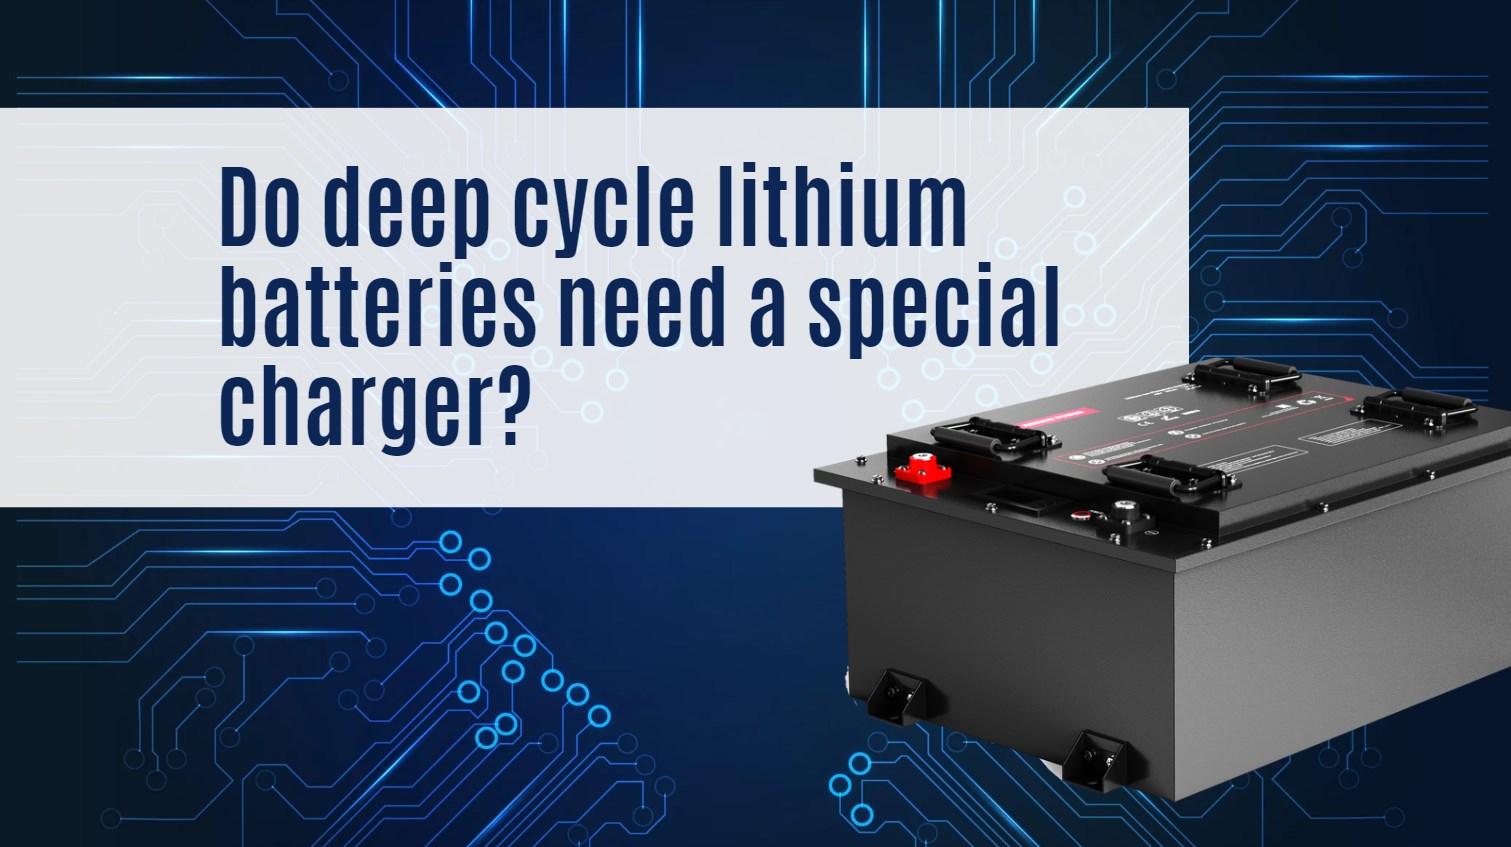 Do deep cycle lithium batteries need a special charger?